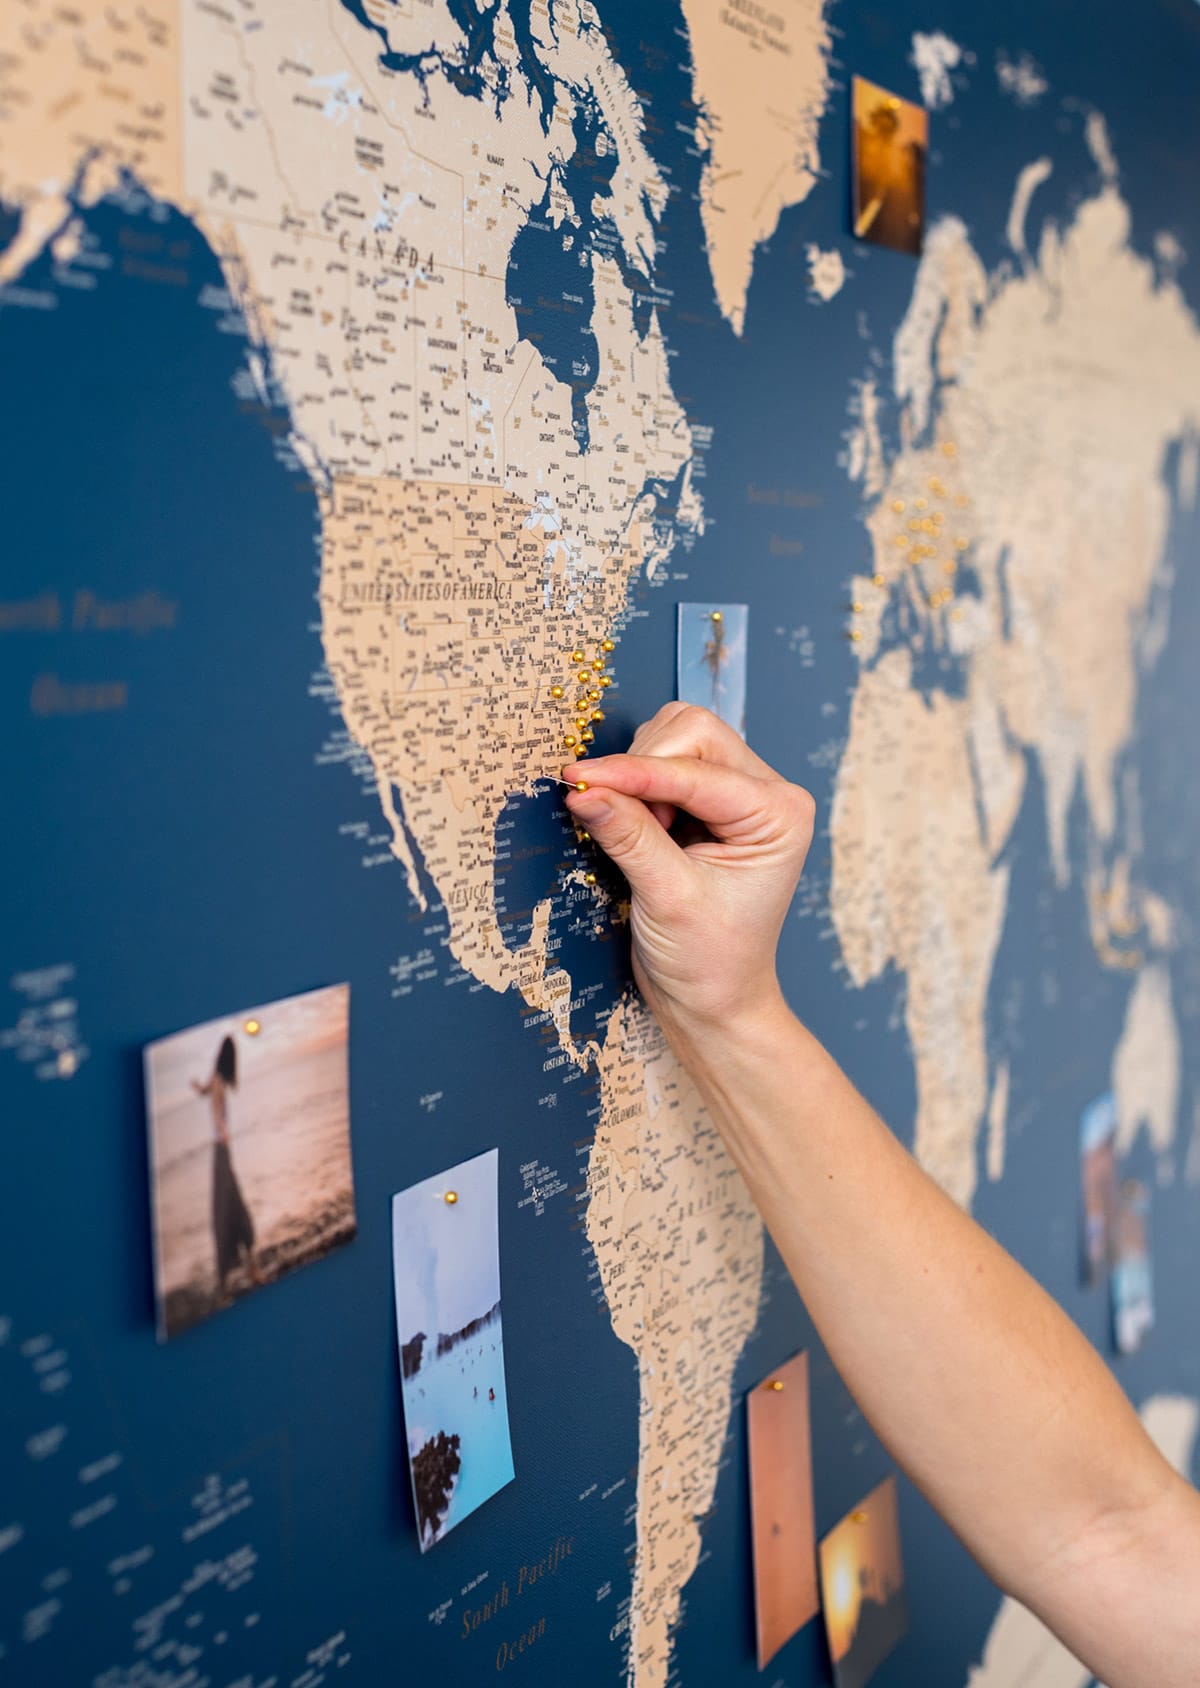 Detailed Blue World Map Wall Art With Pins 